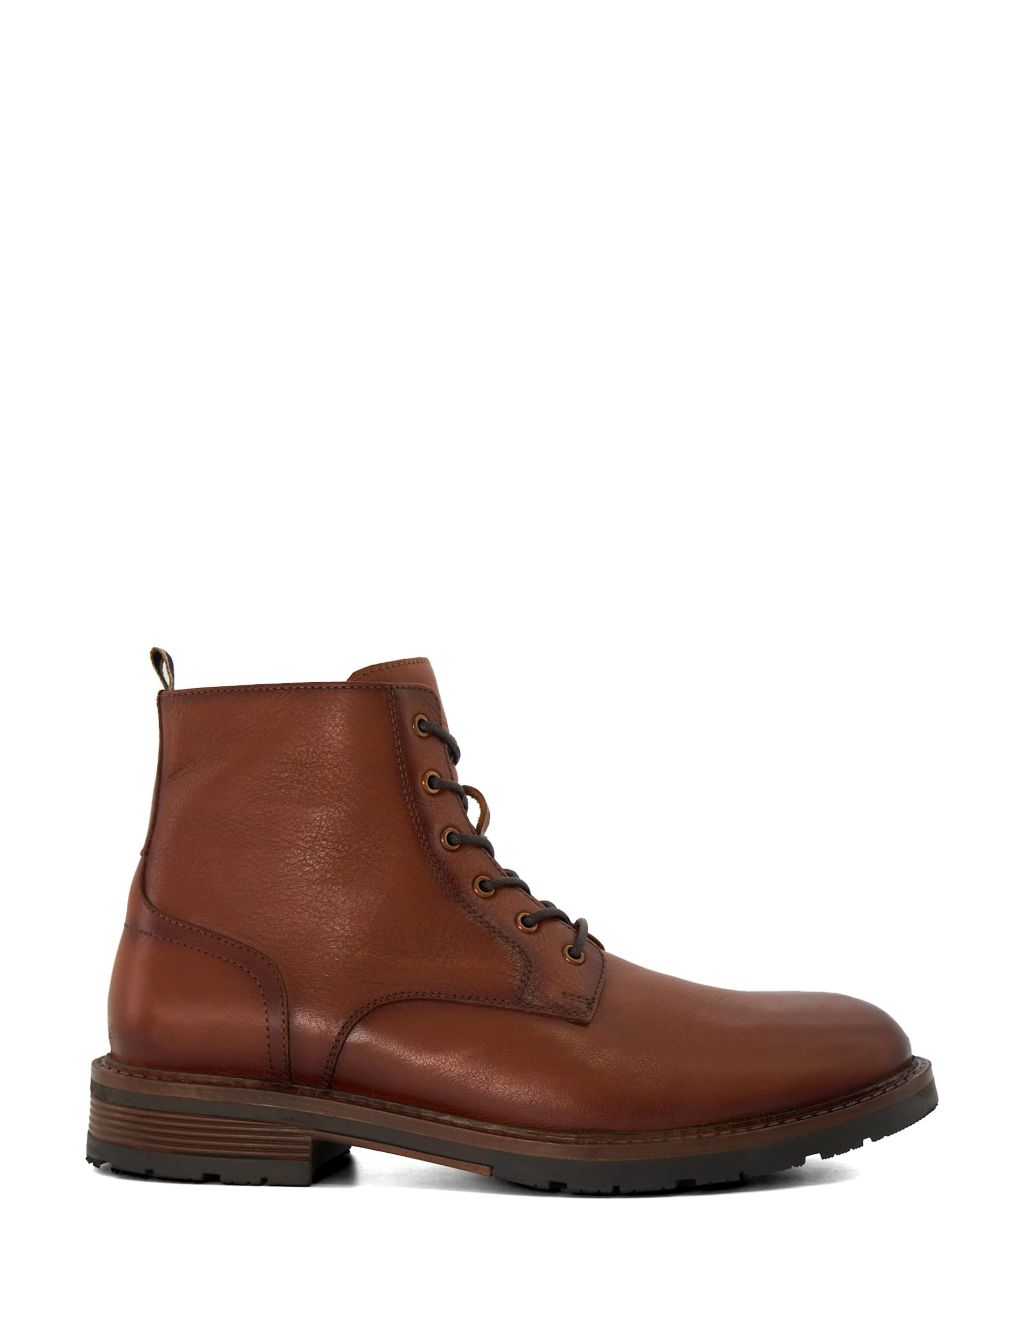 Leather Boots | Dune London | M&S